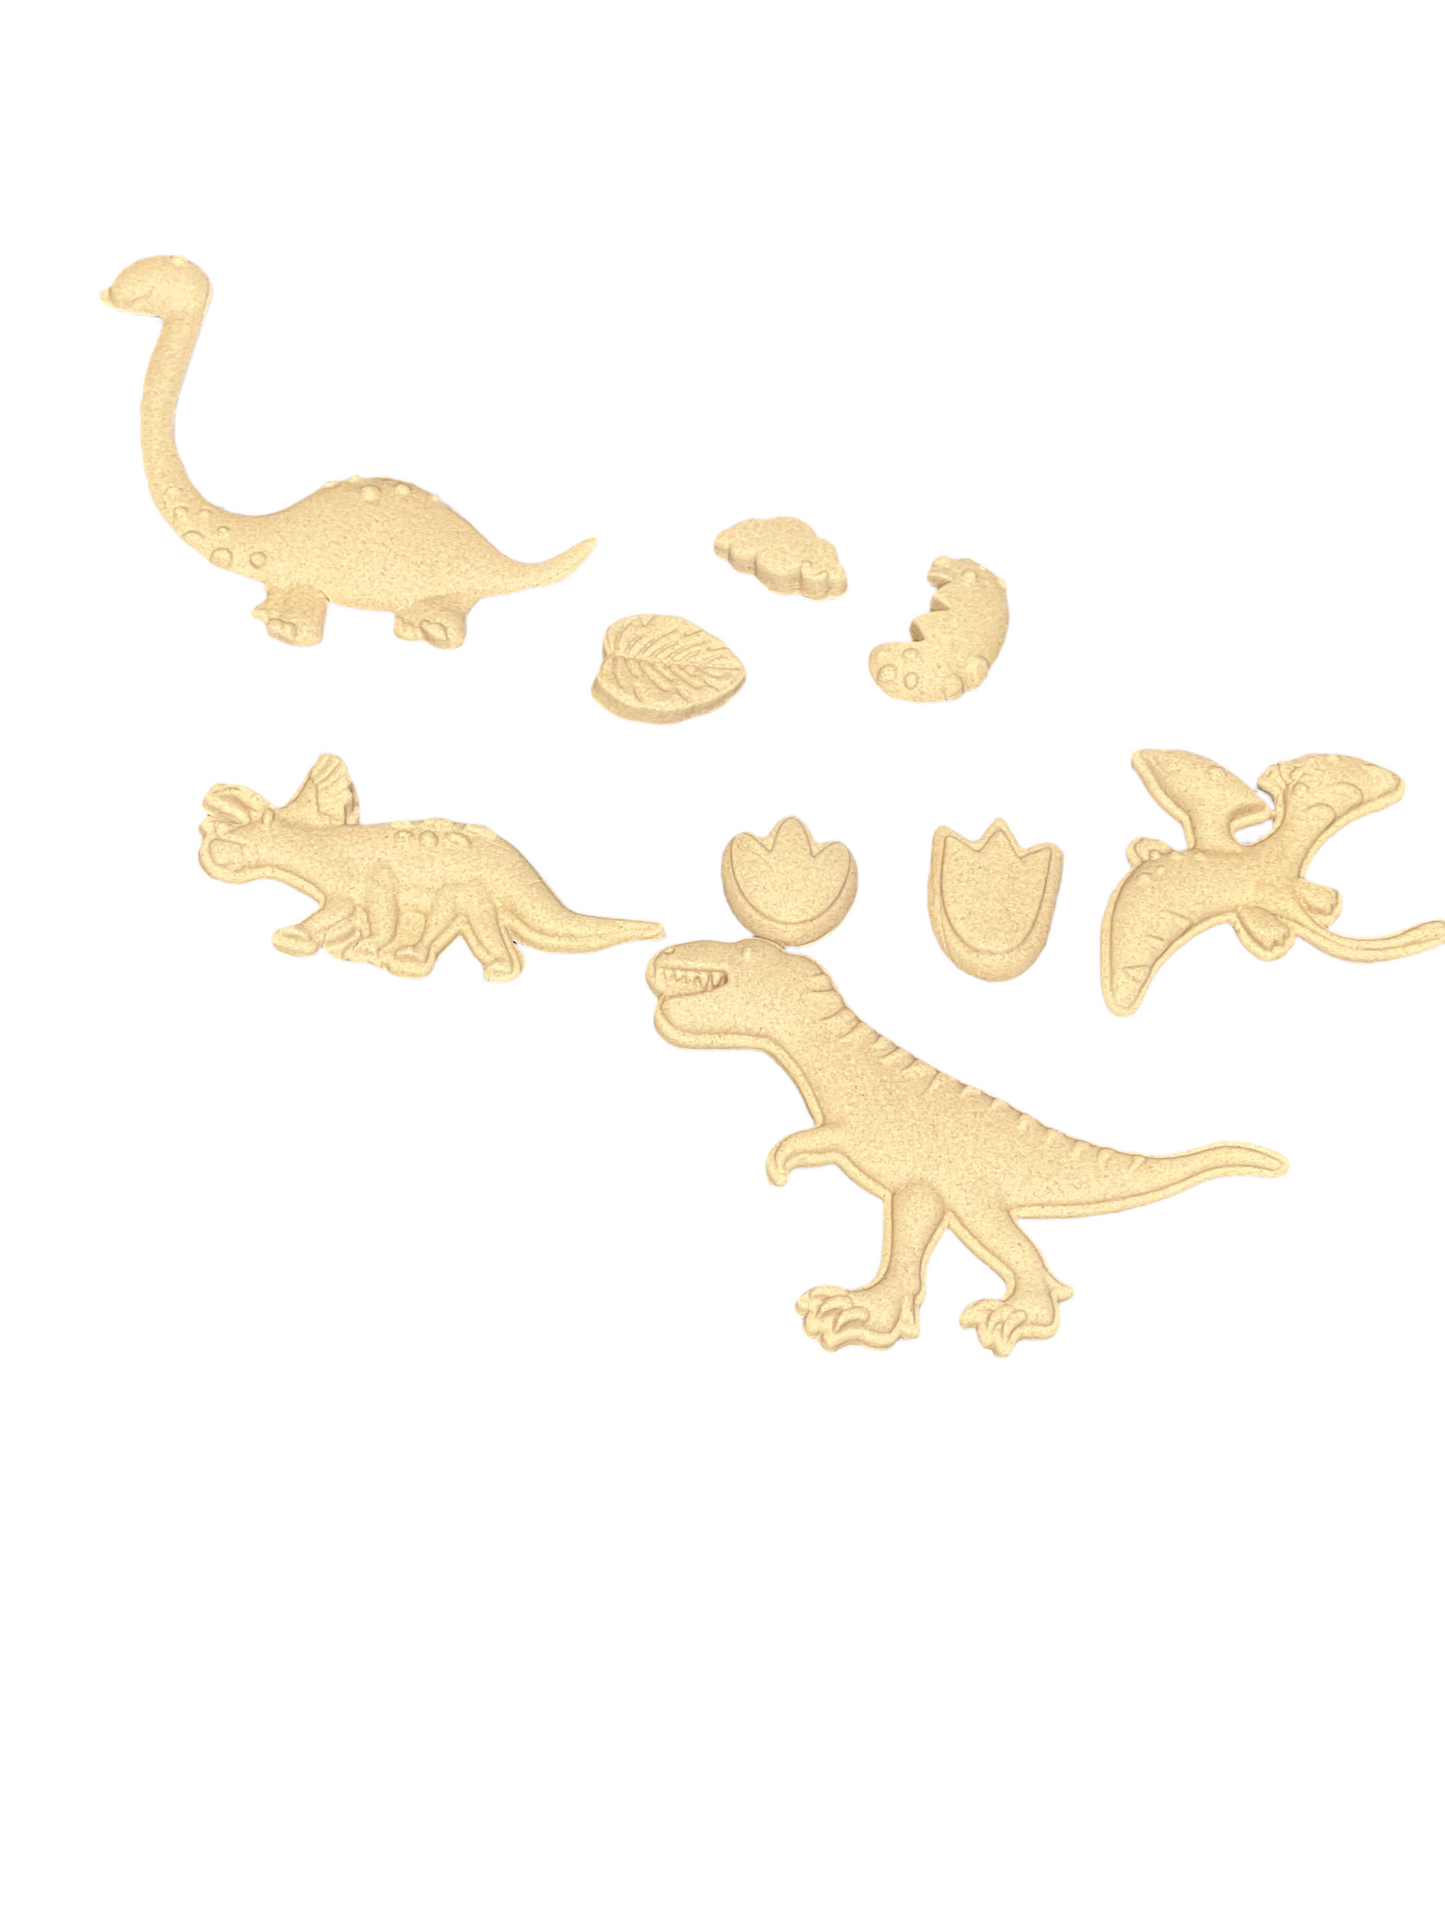 Flexible Pliable Embellishment IFW 2475 Set of Dinosaurs with eggs 9 piece Crafting and scrapbooking size